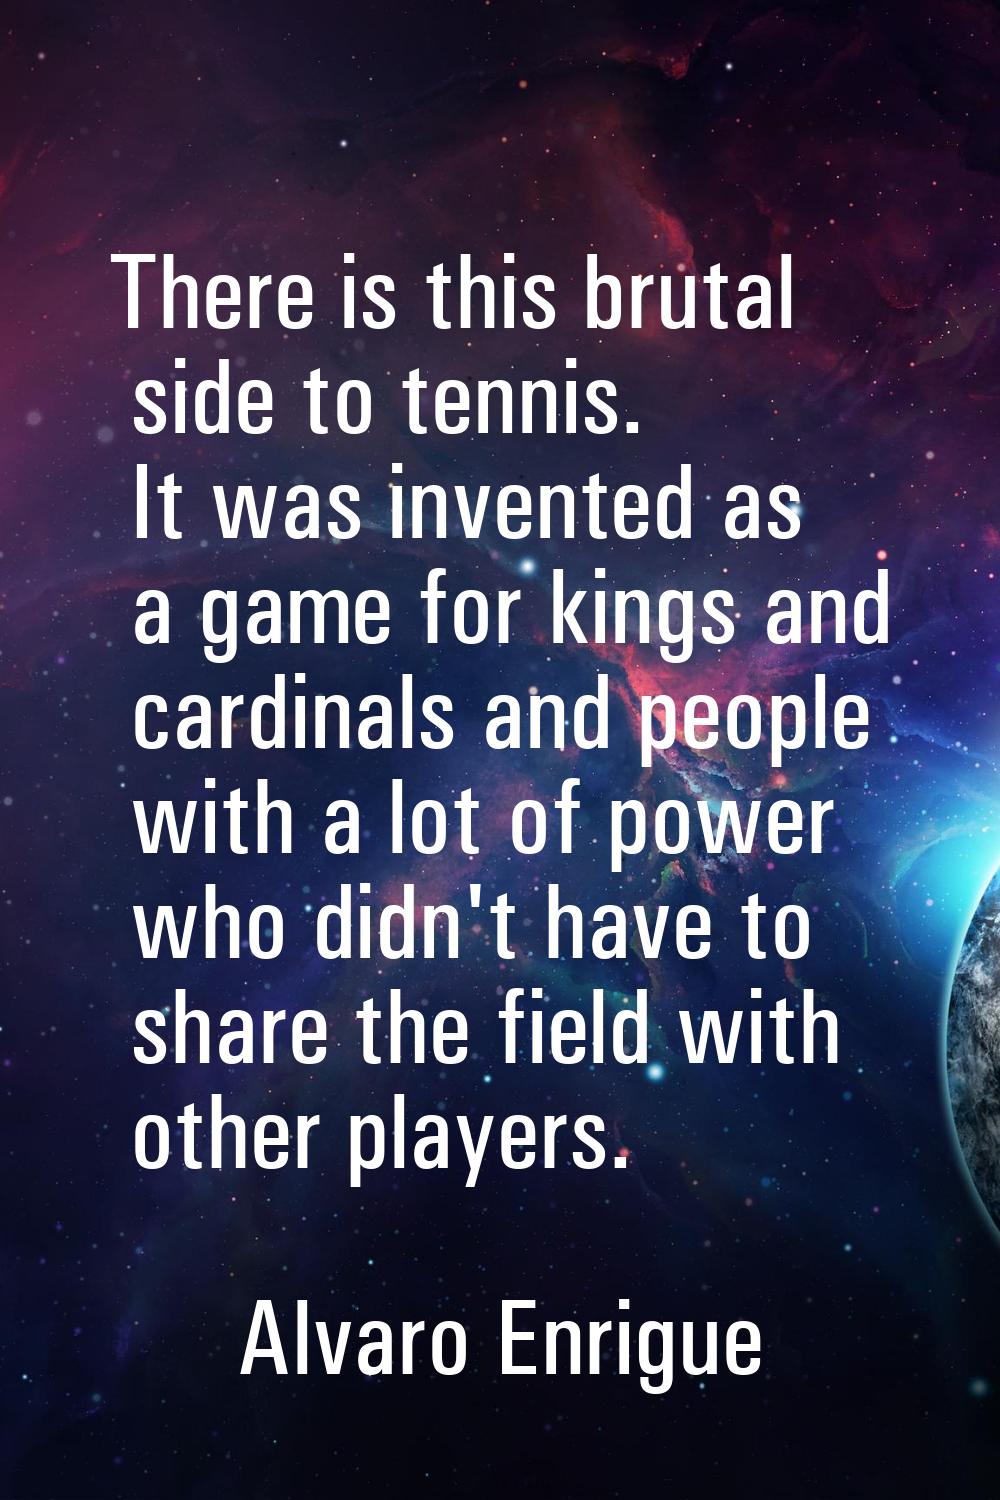 There is this brutal side to tennis. It was invented as a game for kings and cardinals and people w